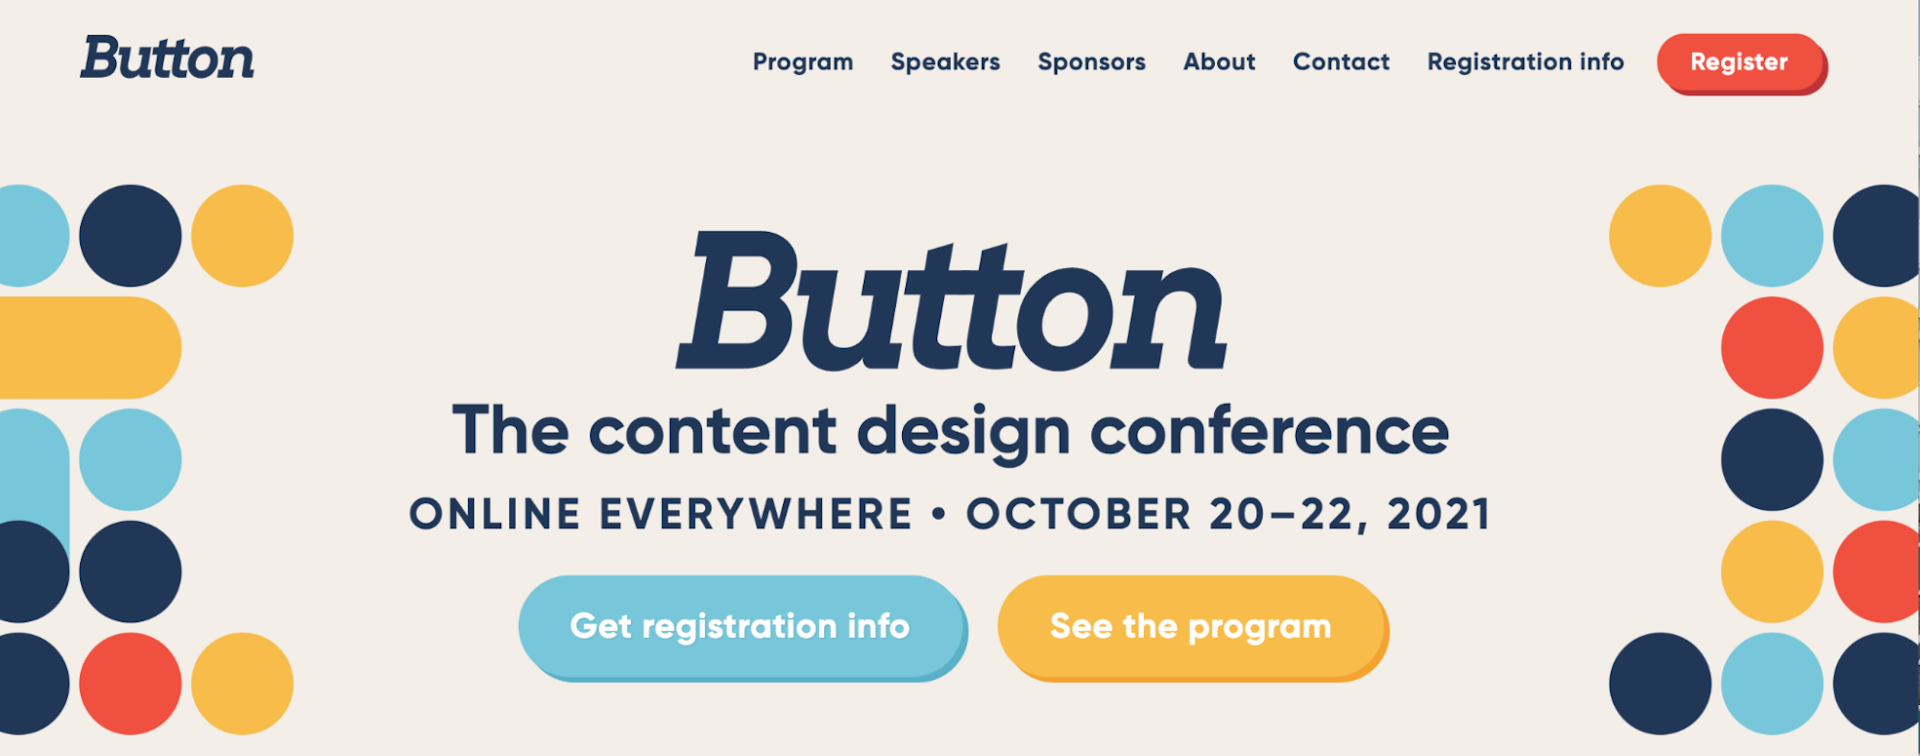 Event webinar for the Button content design conference.